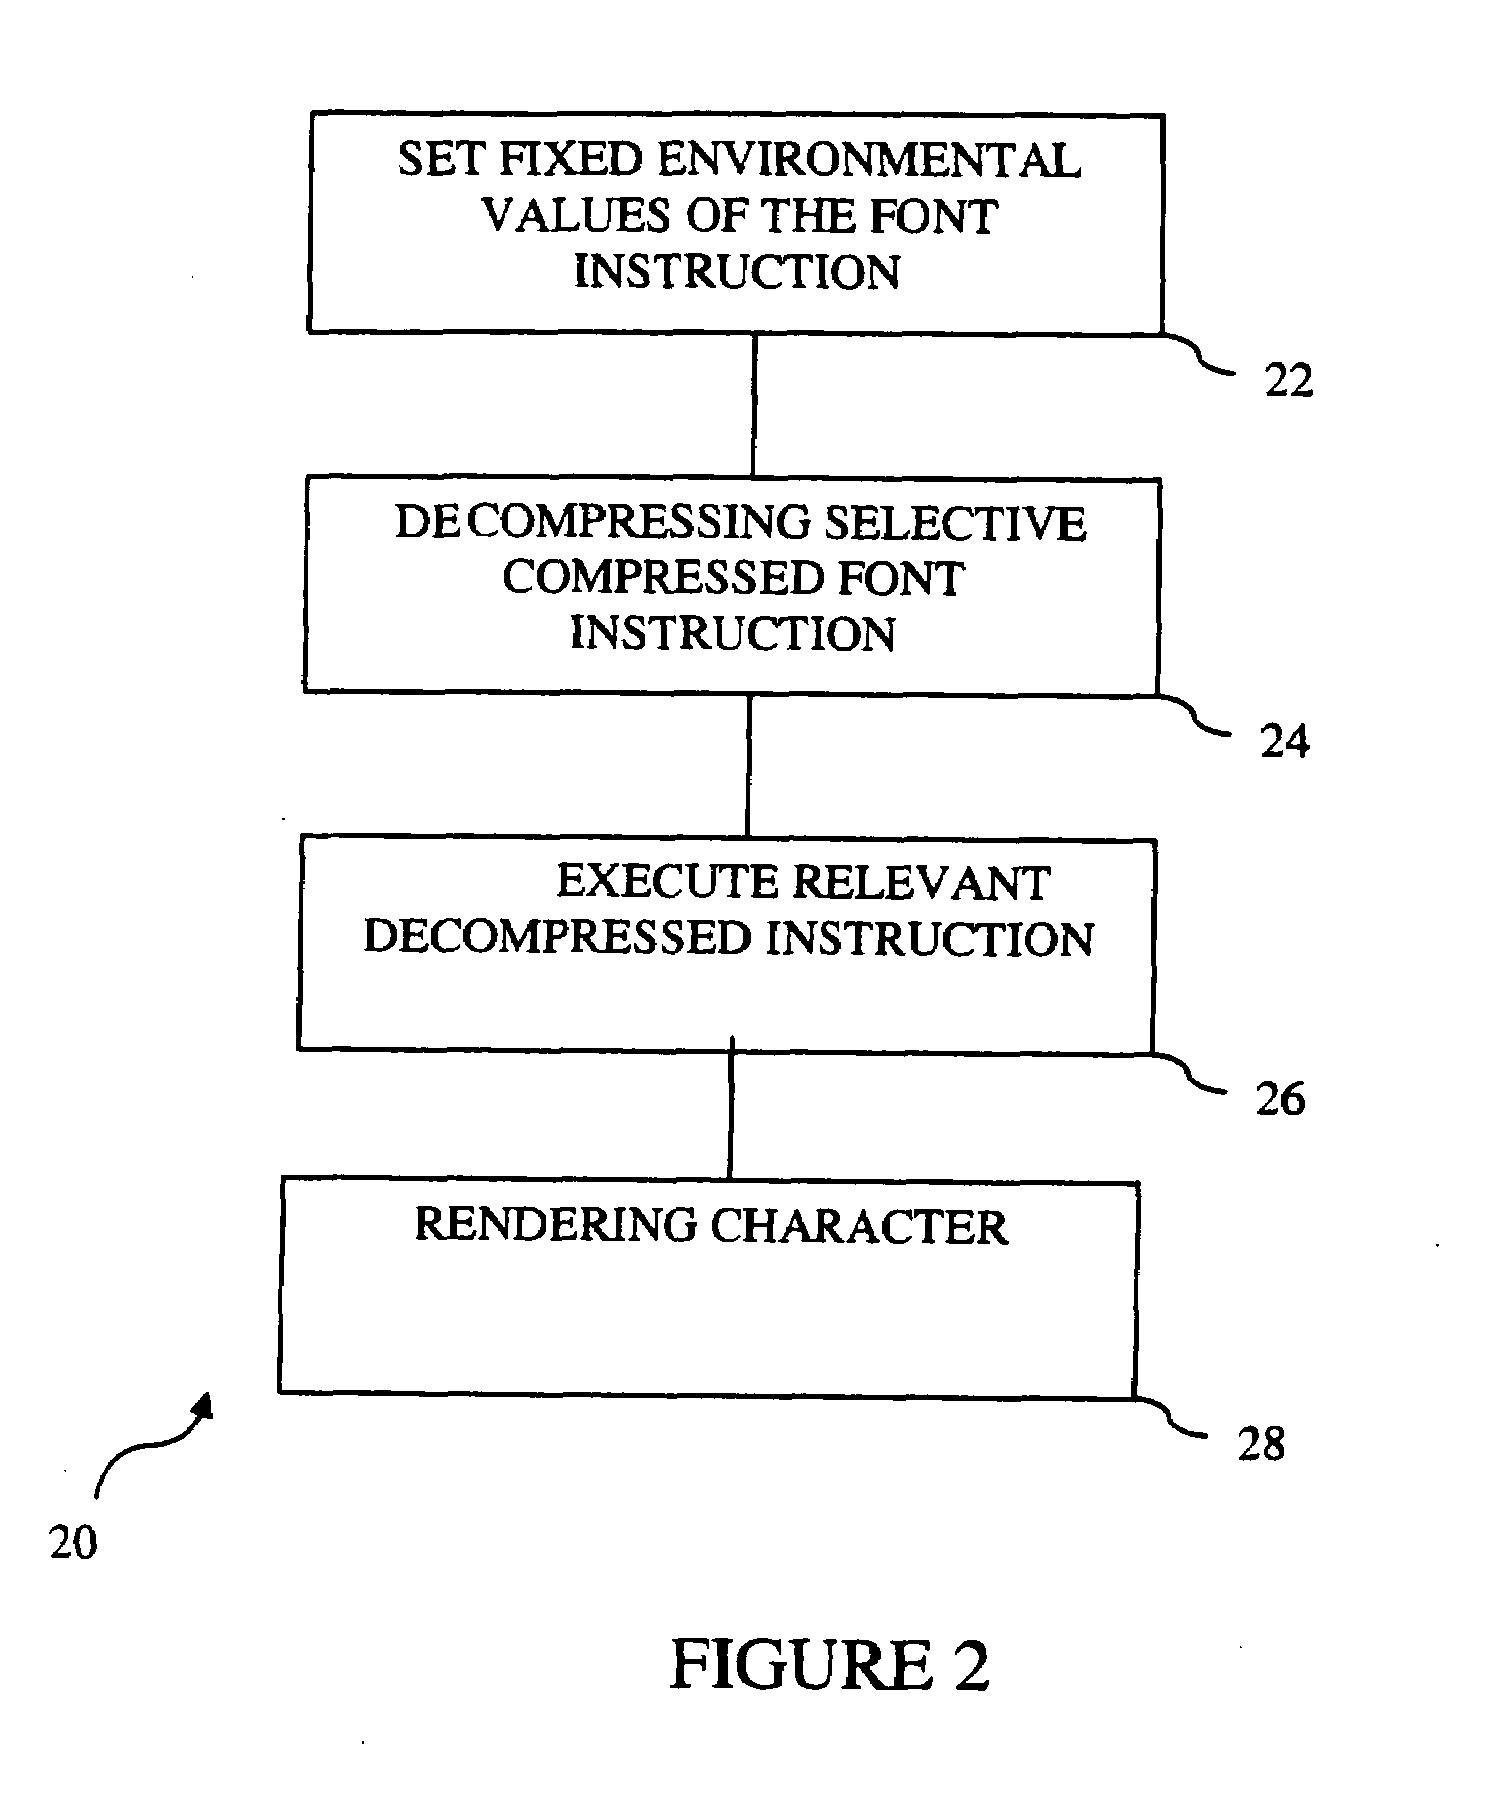 Method for reducing size and increasing speed for font generation of instructions